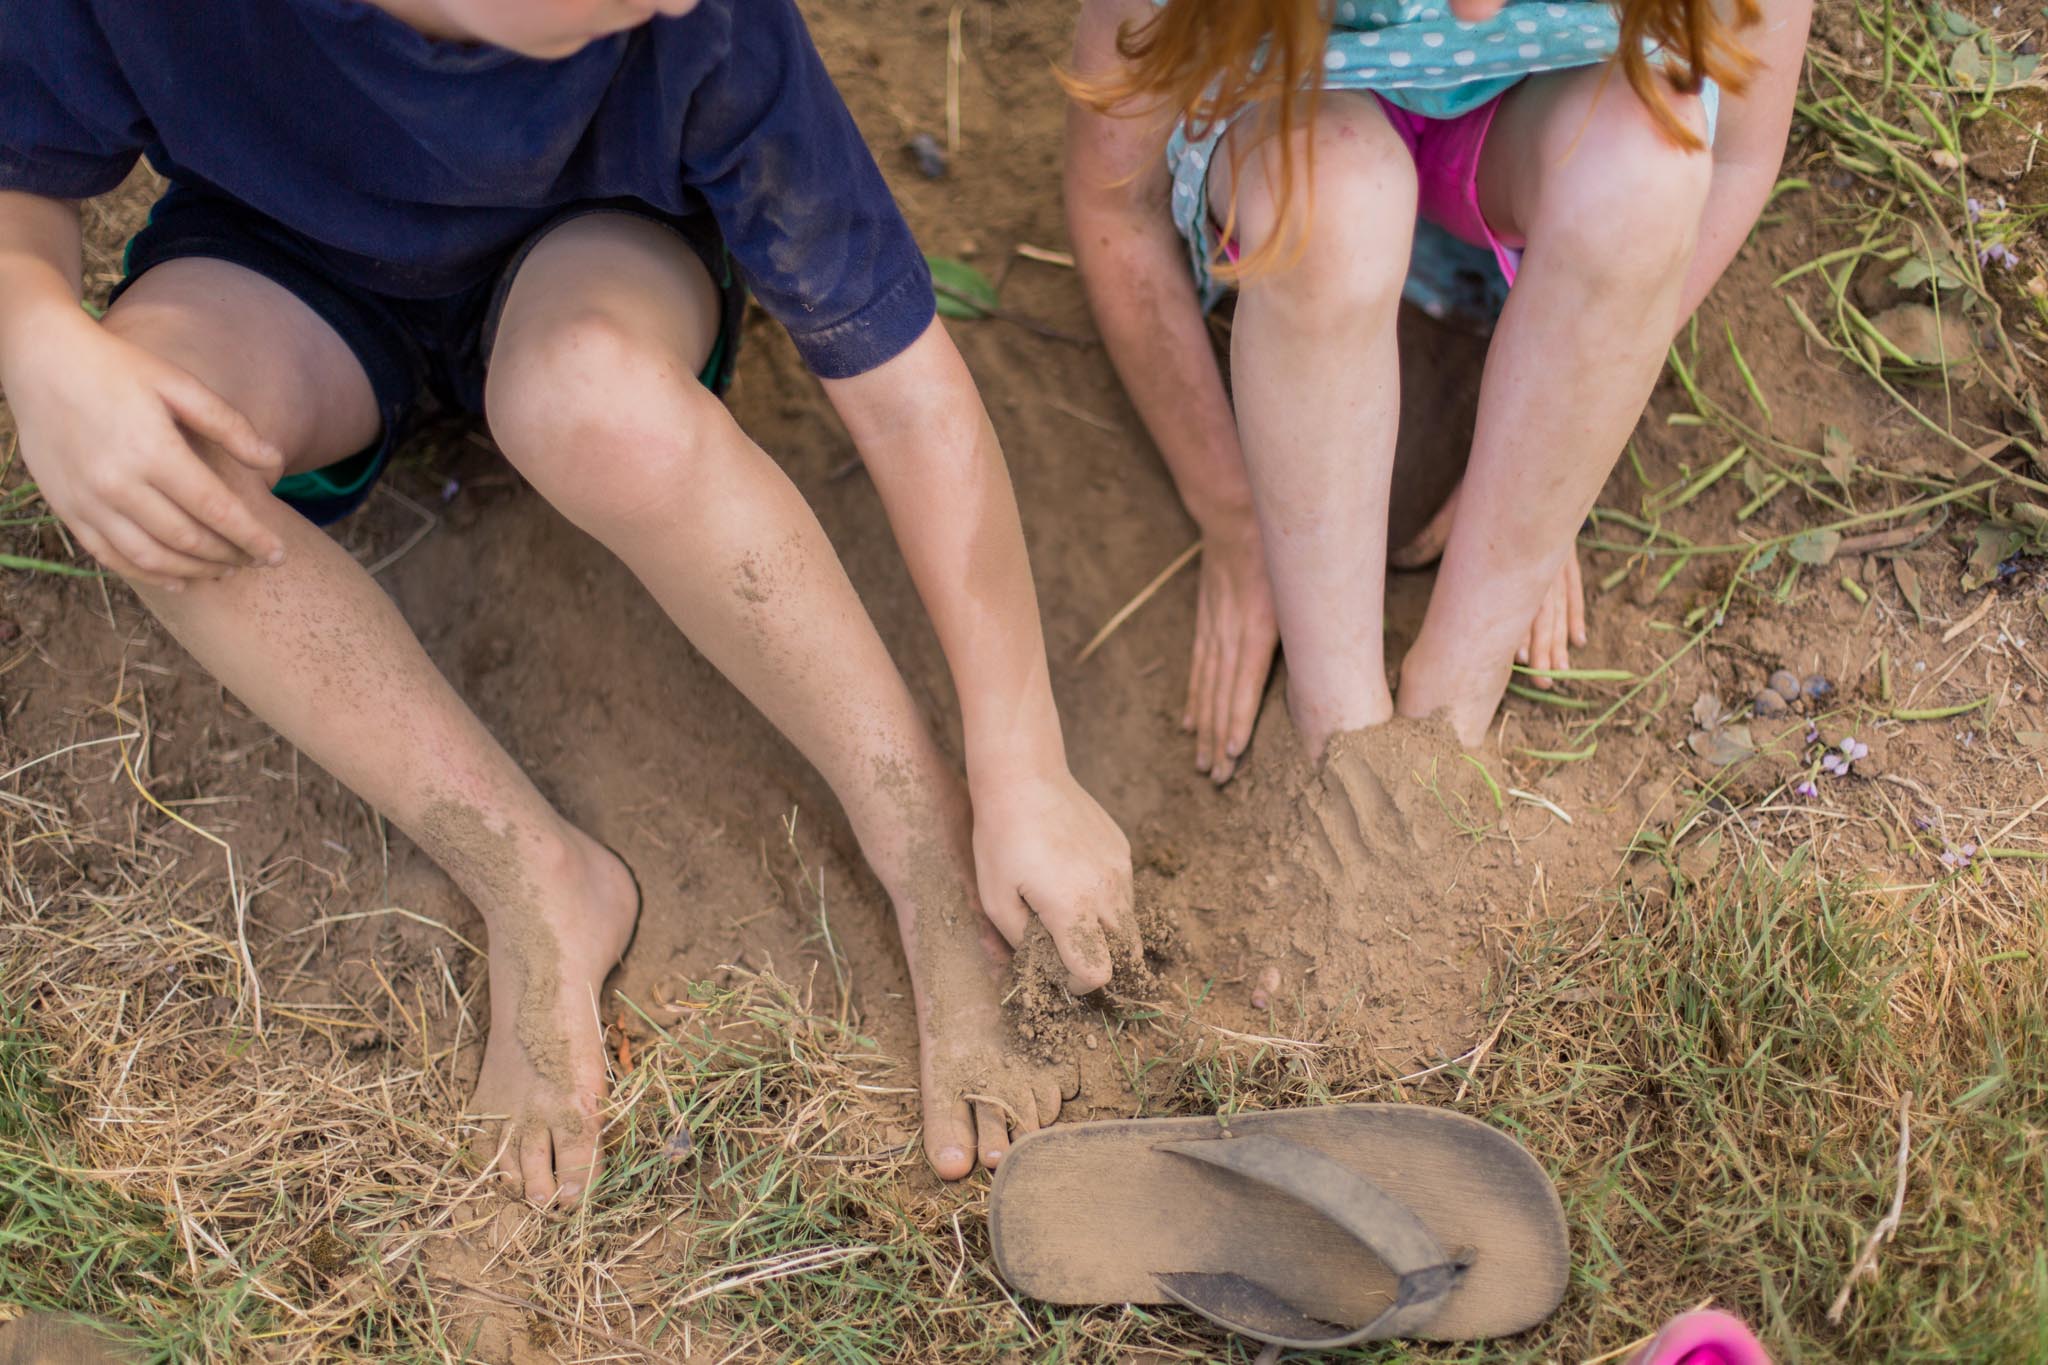 Photo of two kids playing in the dirt; only their legs and feet are visible.